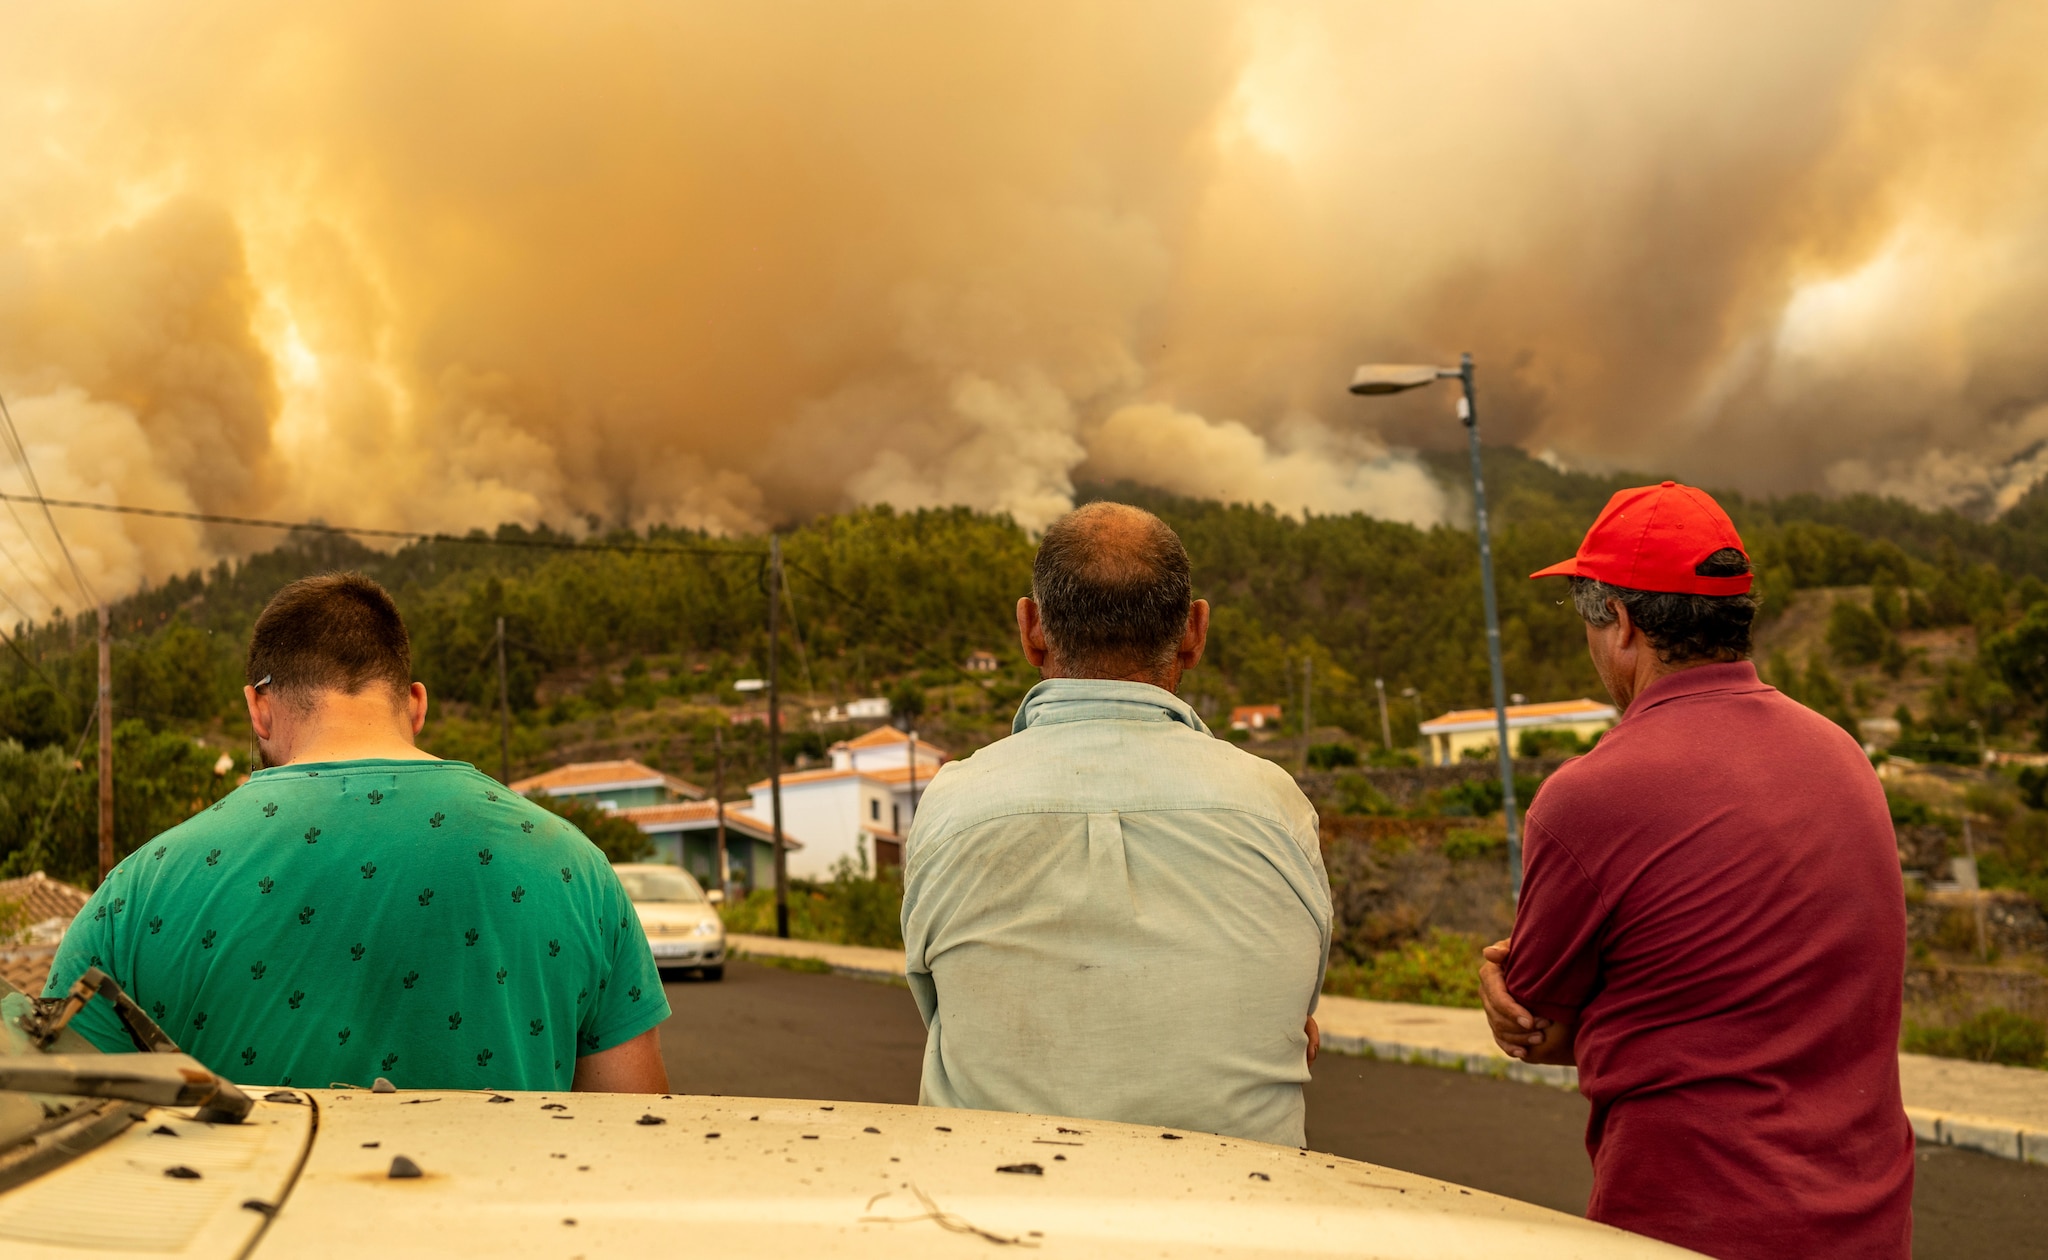 More than 4,000 people evacuated following a forest fire in La Palma